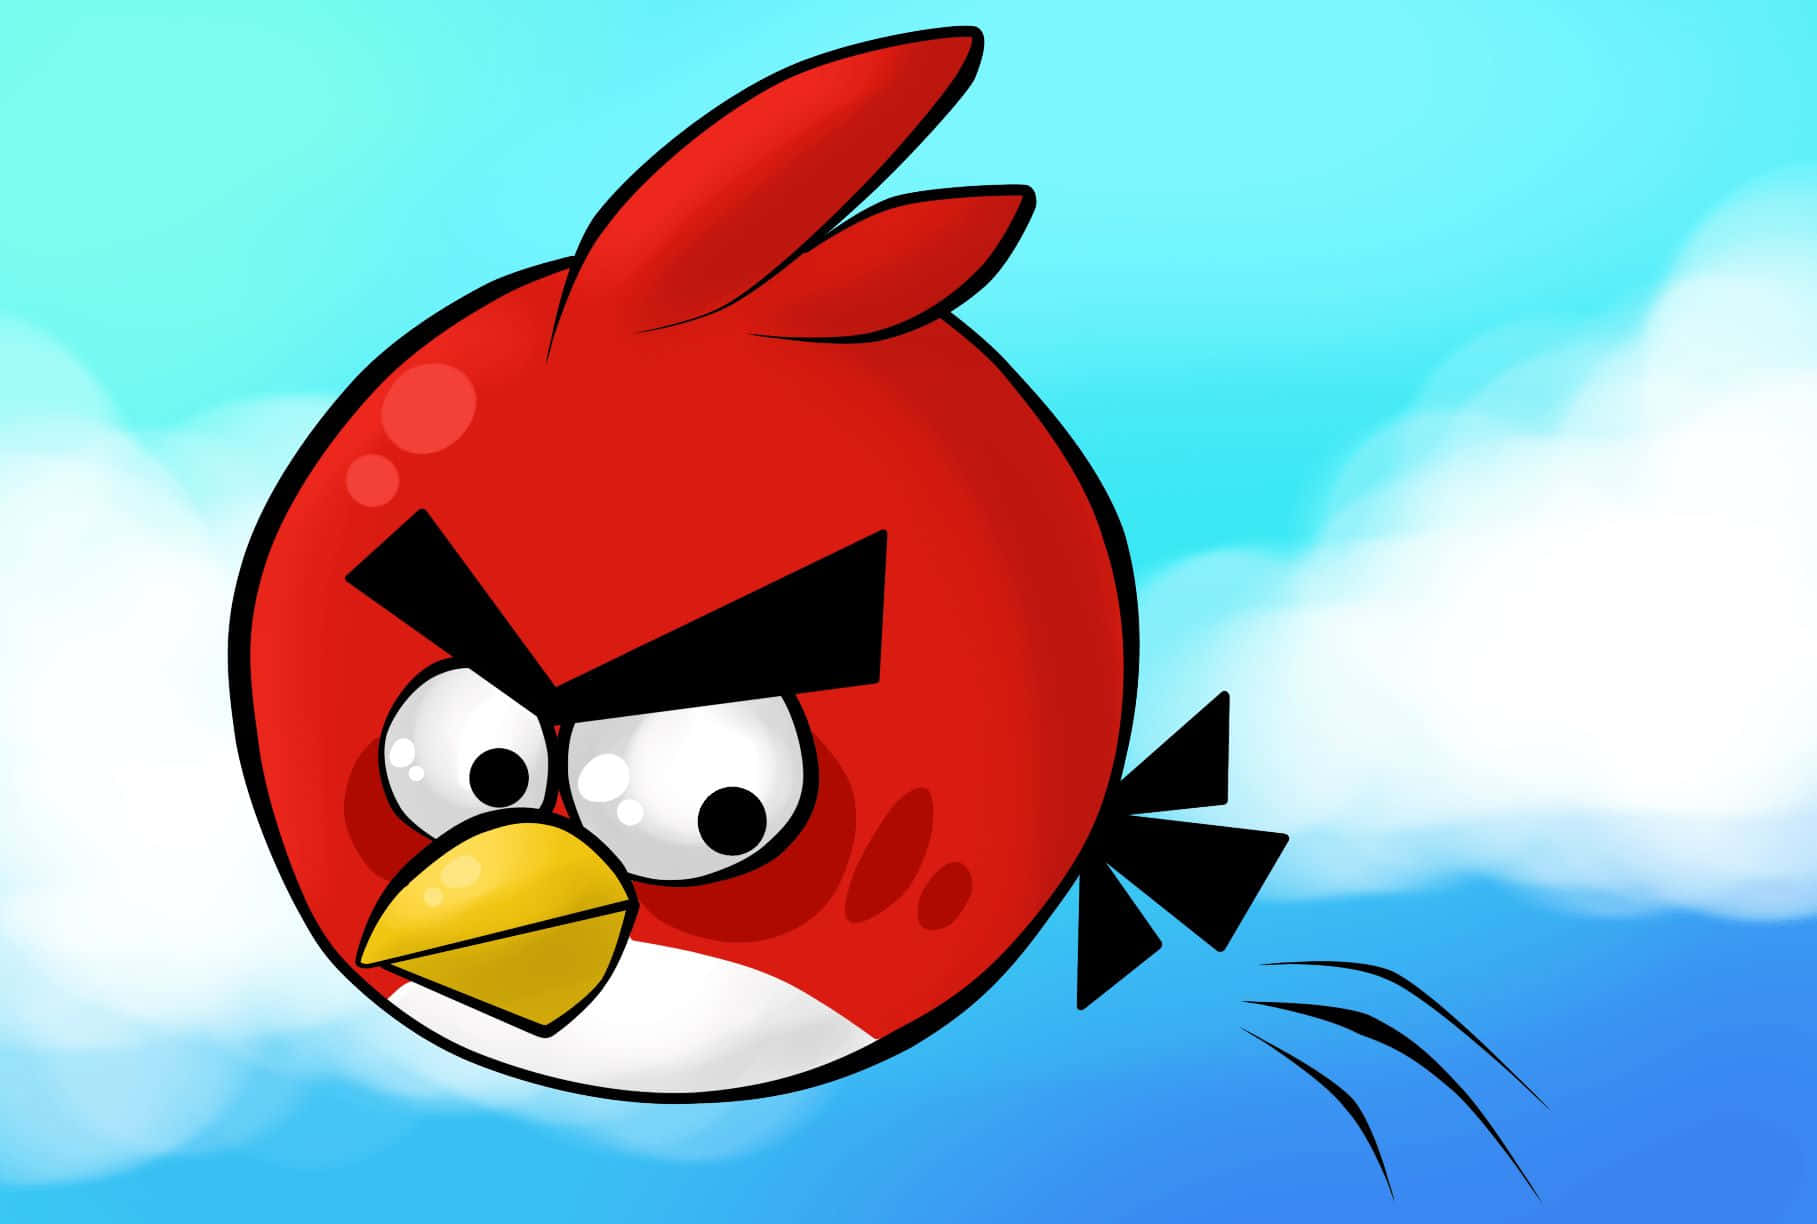 Red Angry Bird Character Wallpaper